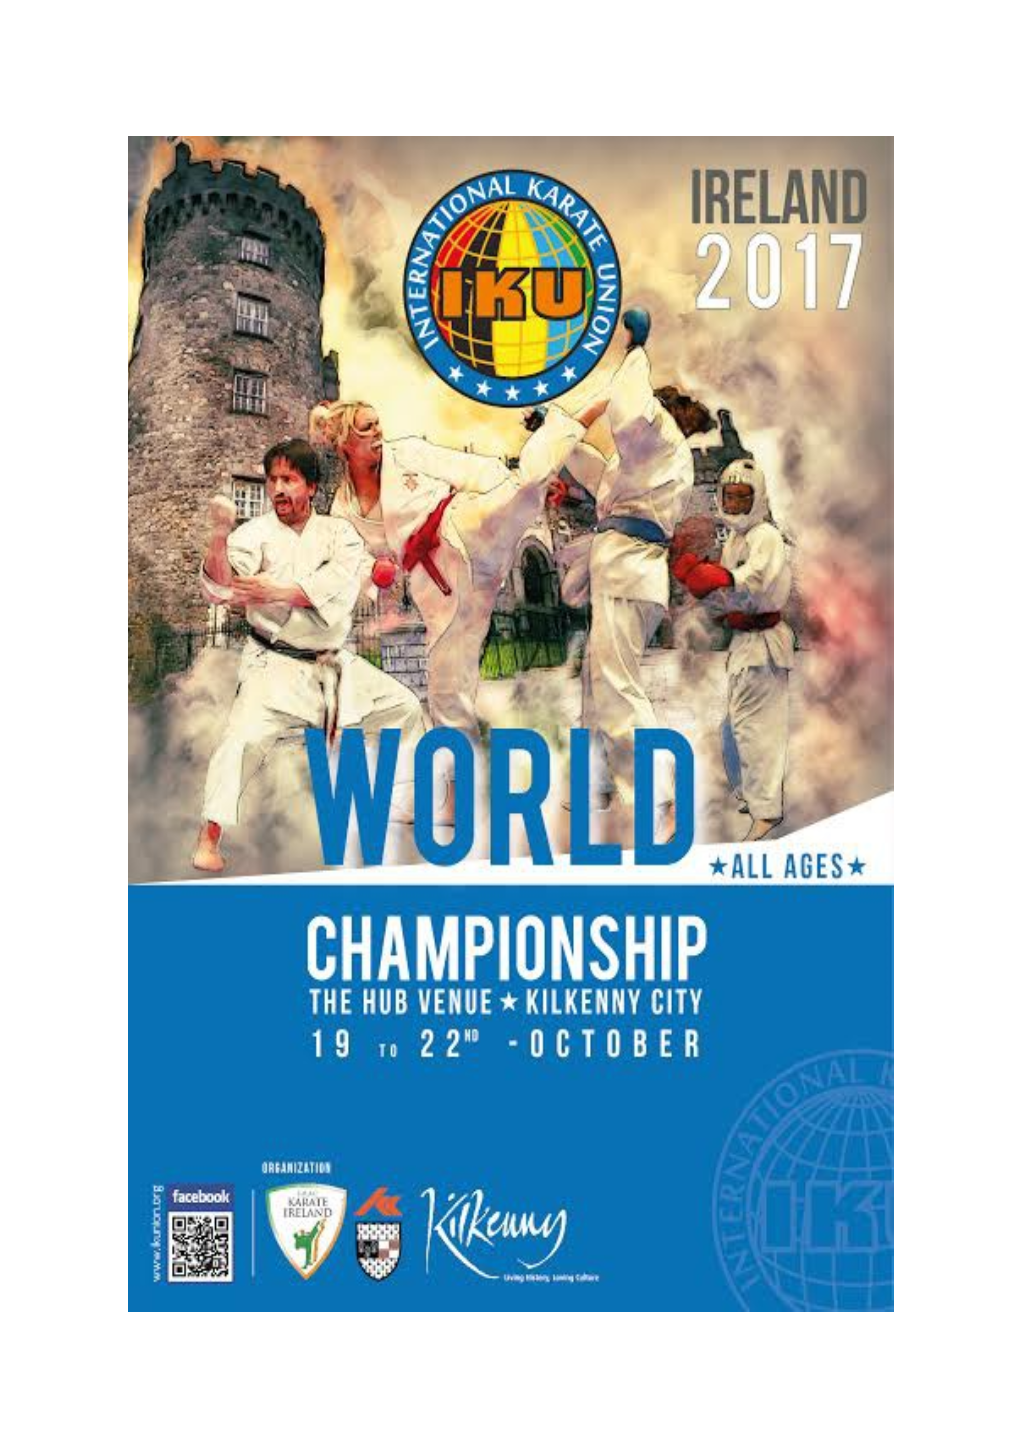 World Championships for All Ages